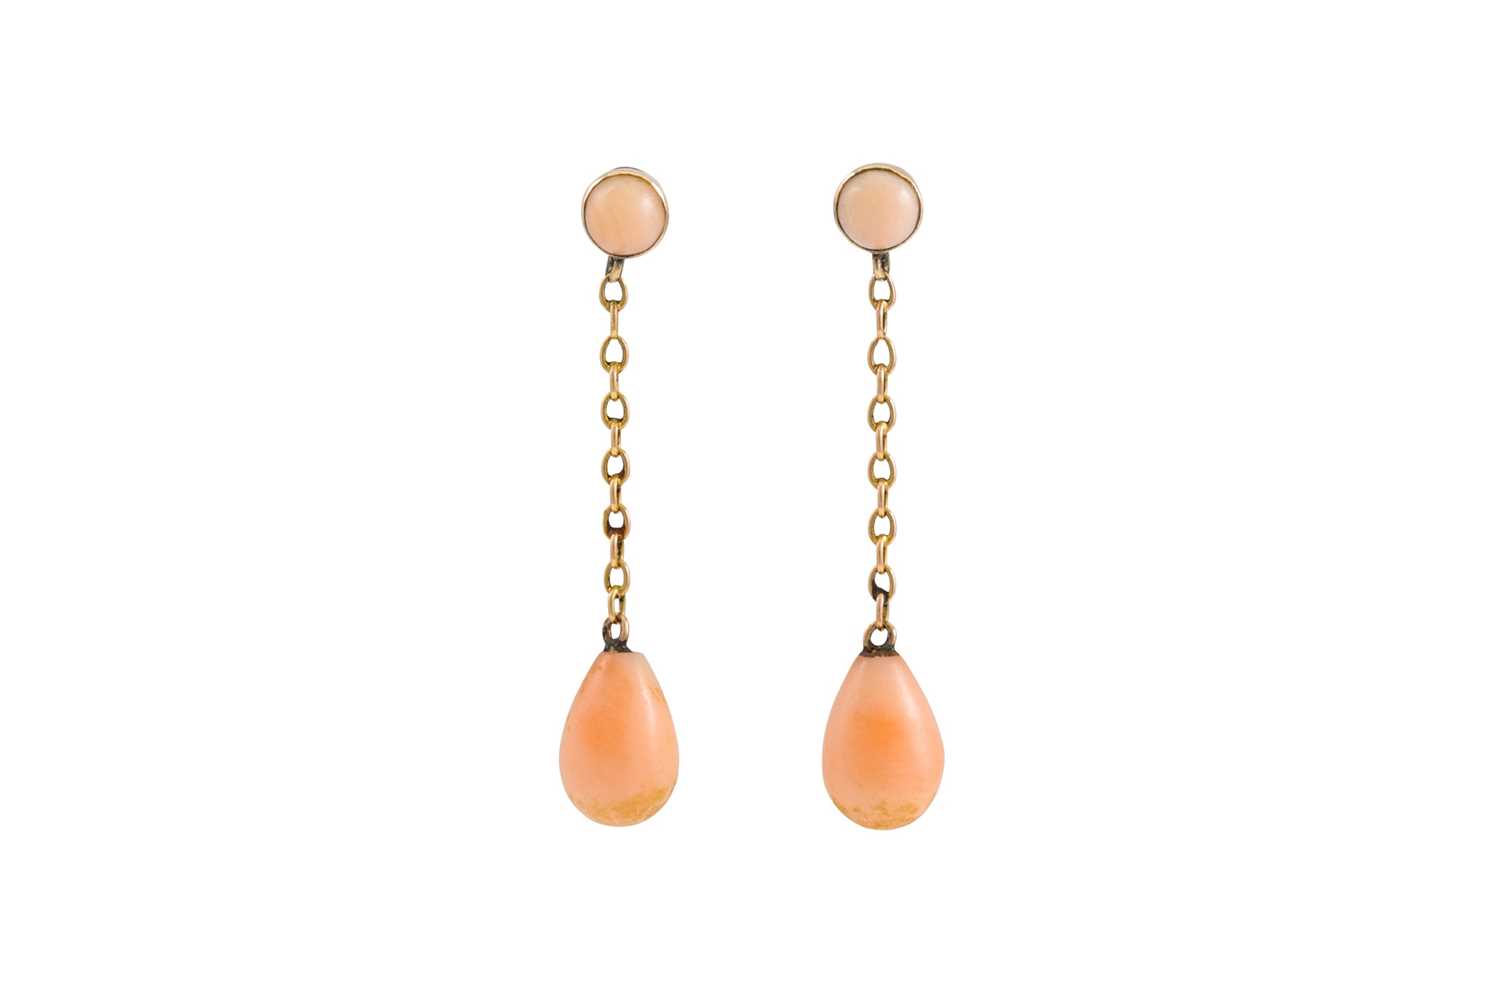 Lot 4 - A PAIR OF DROP EARRINGS, mounted in gold